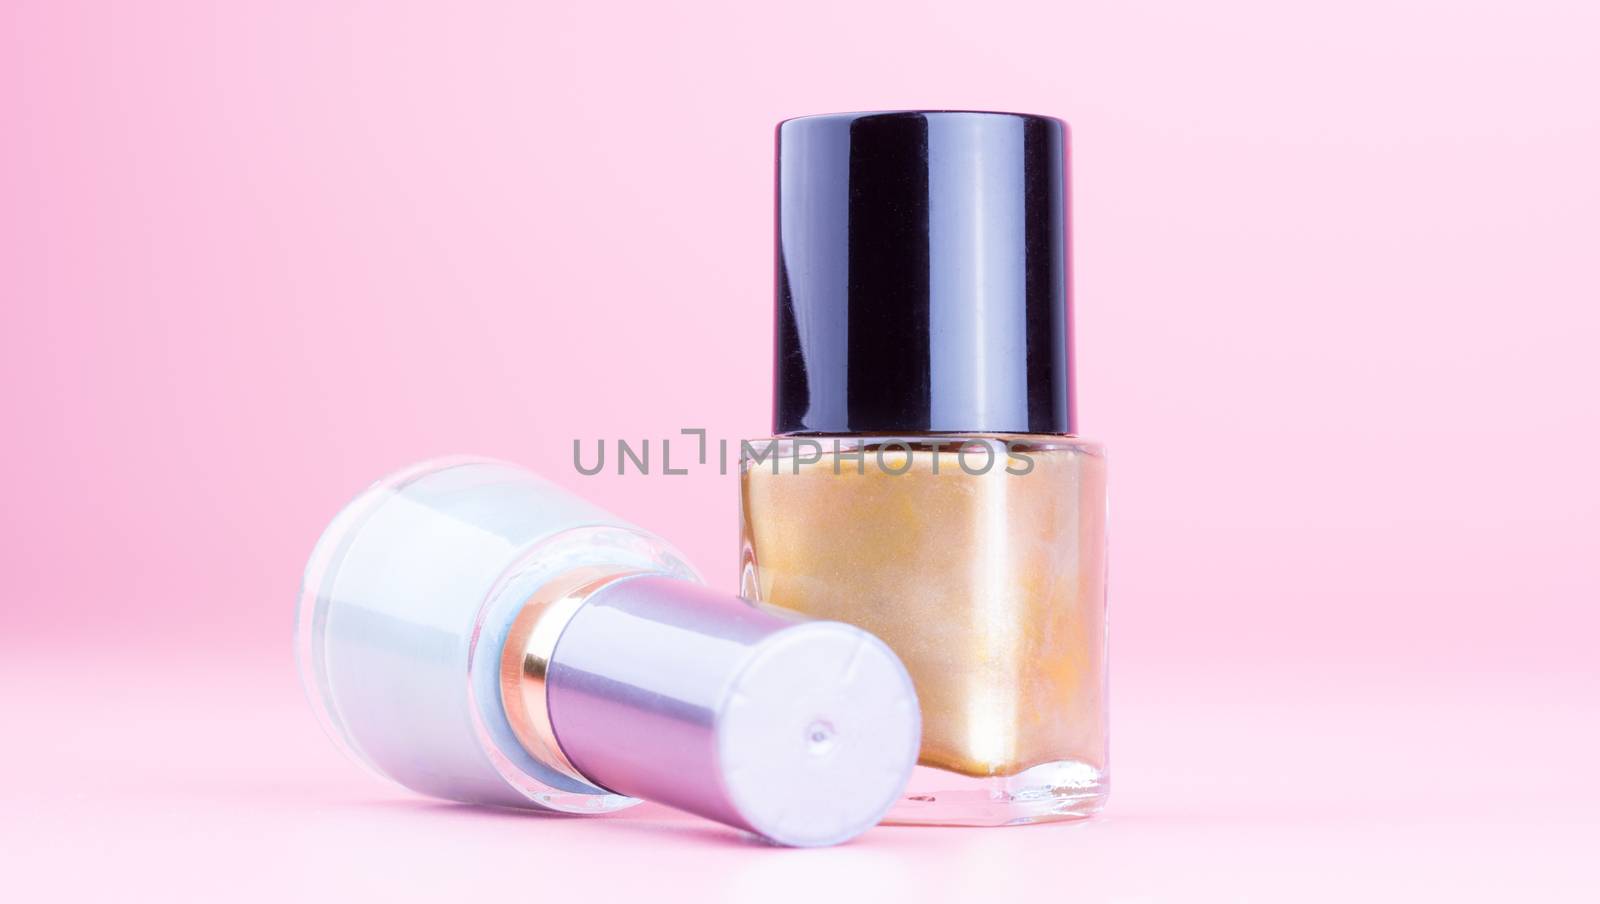 Two bottle of nail polish by lanalanglois